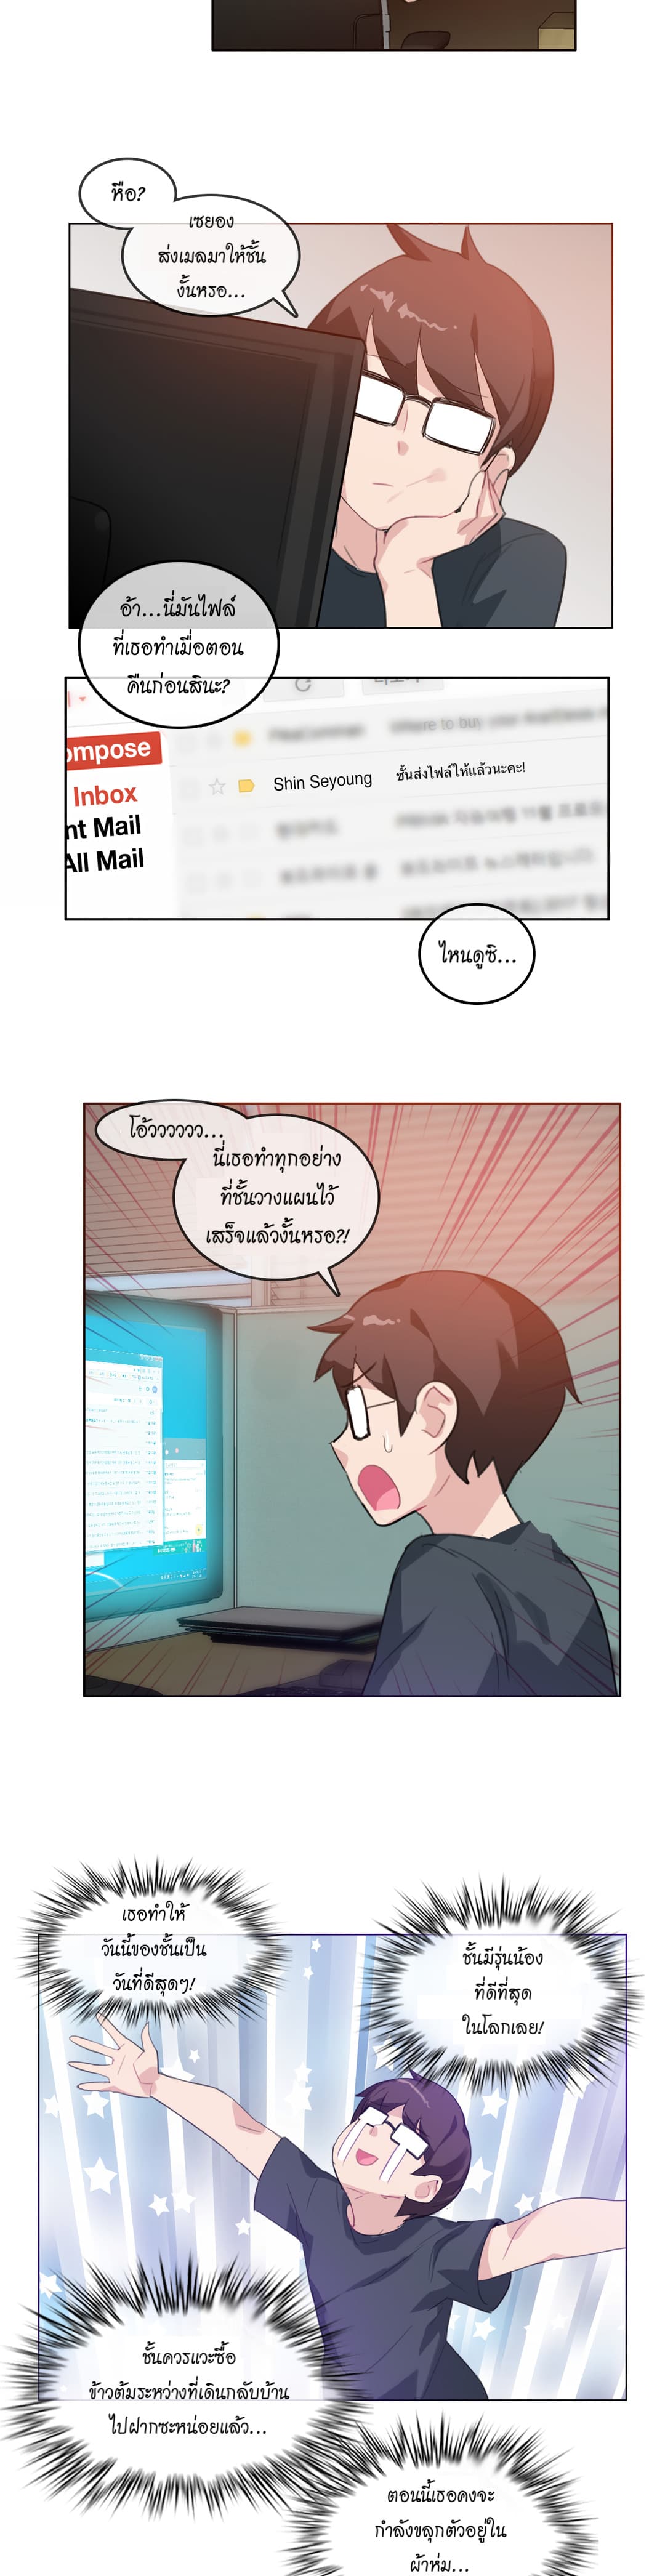 A Pervert’s Daily Life 15 (9)